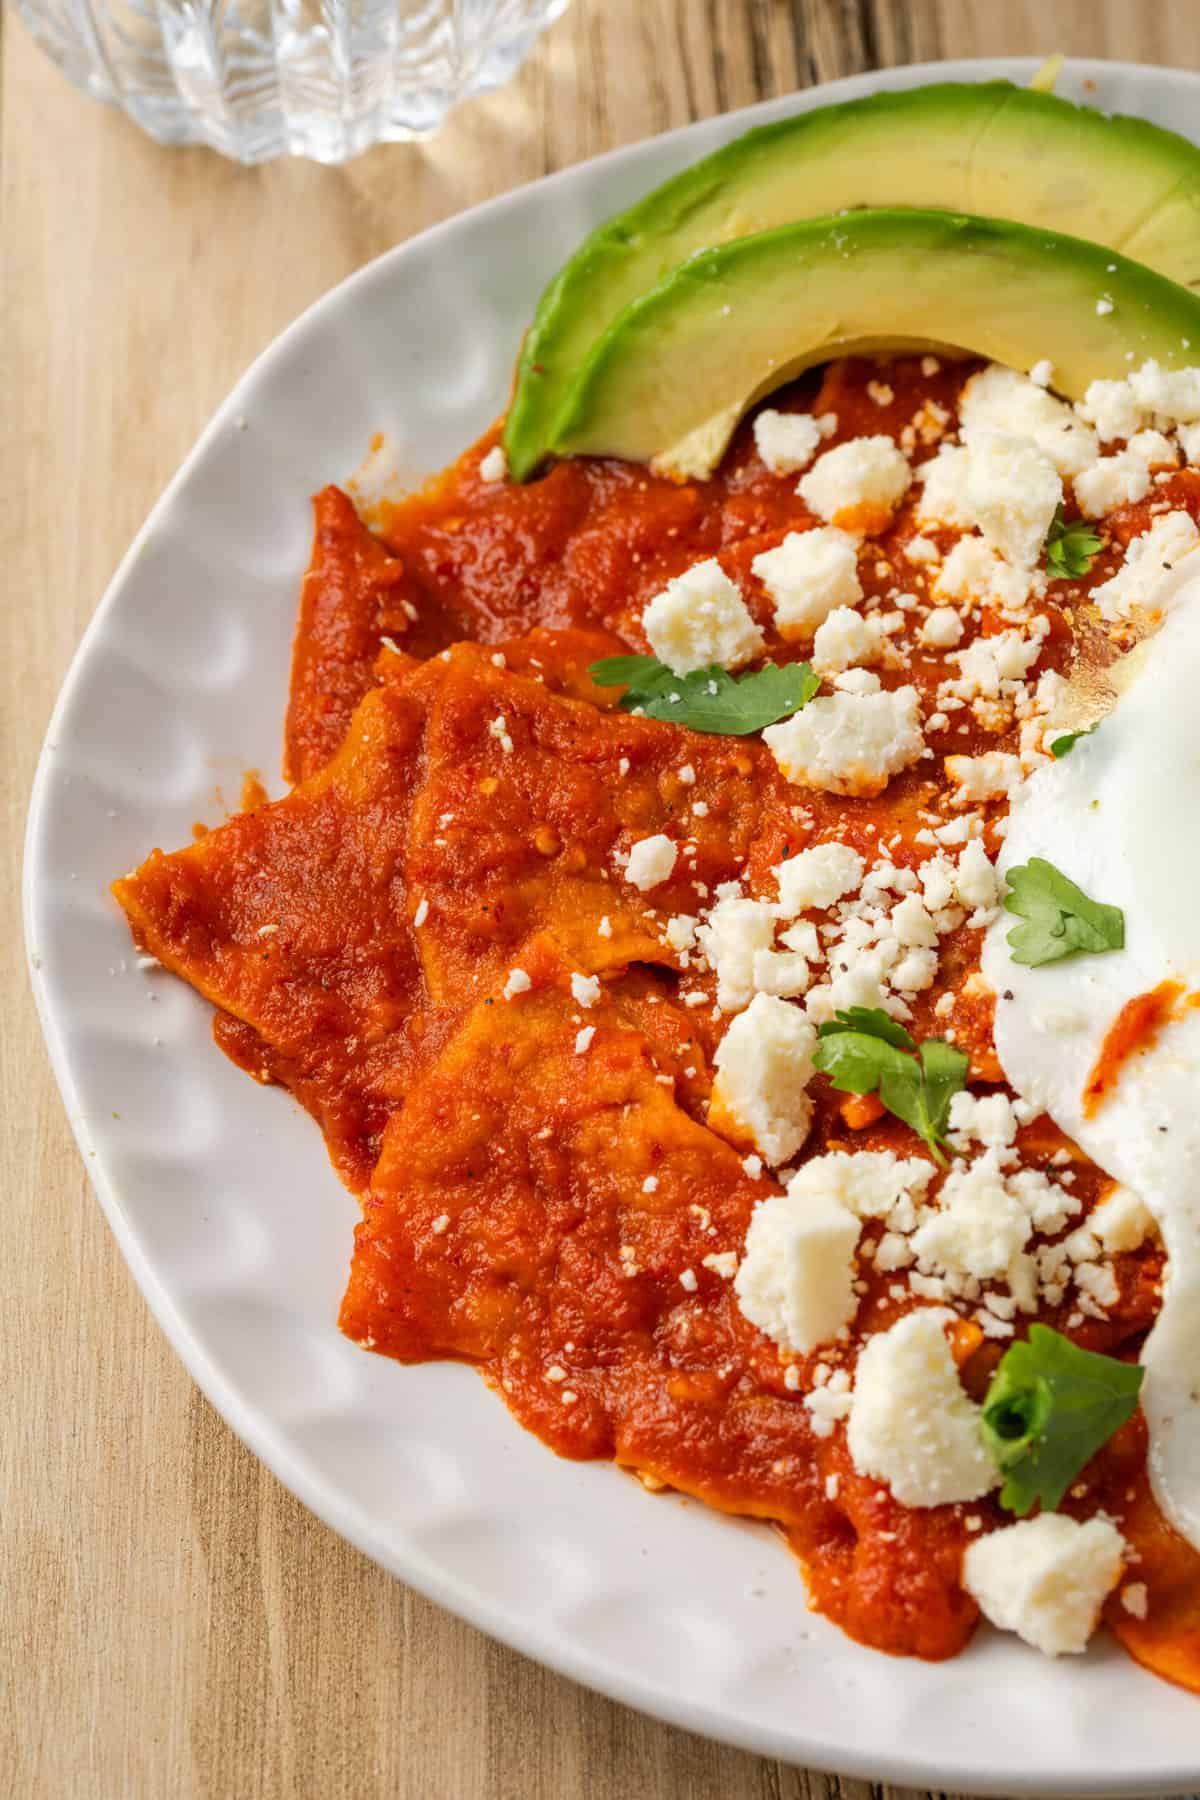 Chilaquiles rojos are shown on a white plate topped with red sauce, crumbled cheese, parsley, sliced avocado, and a fried egg.